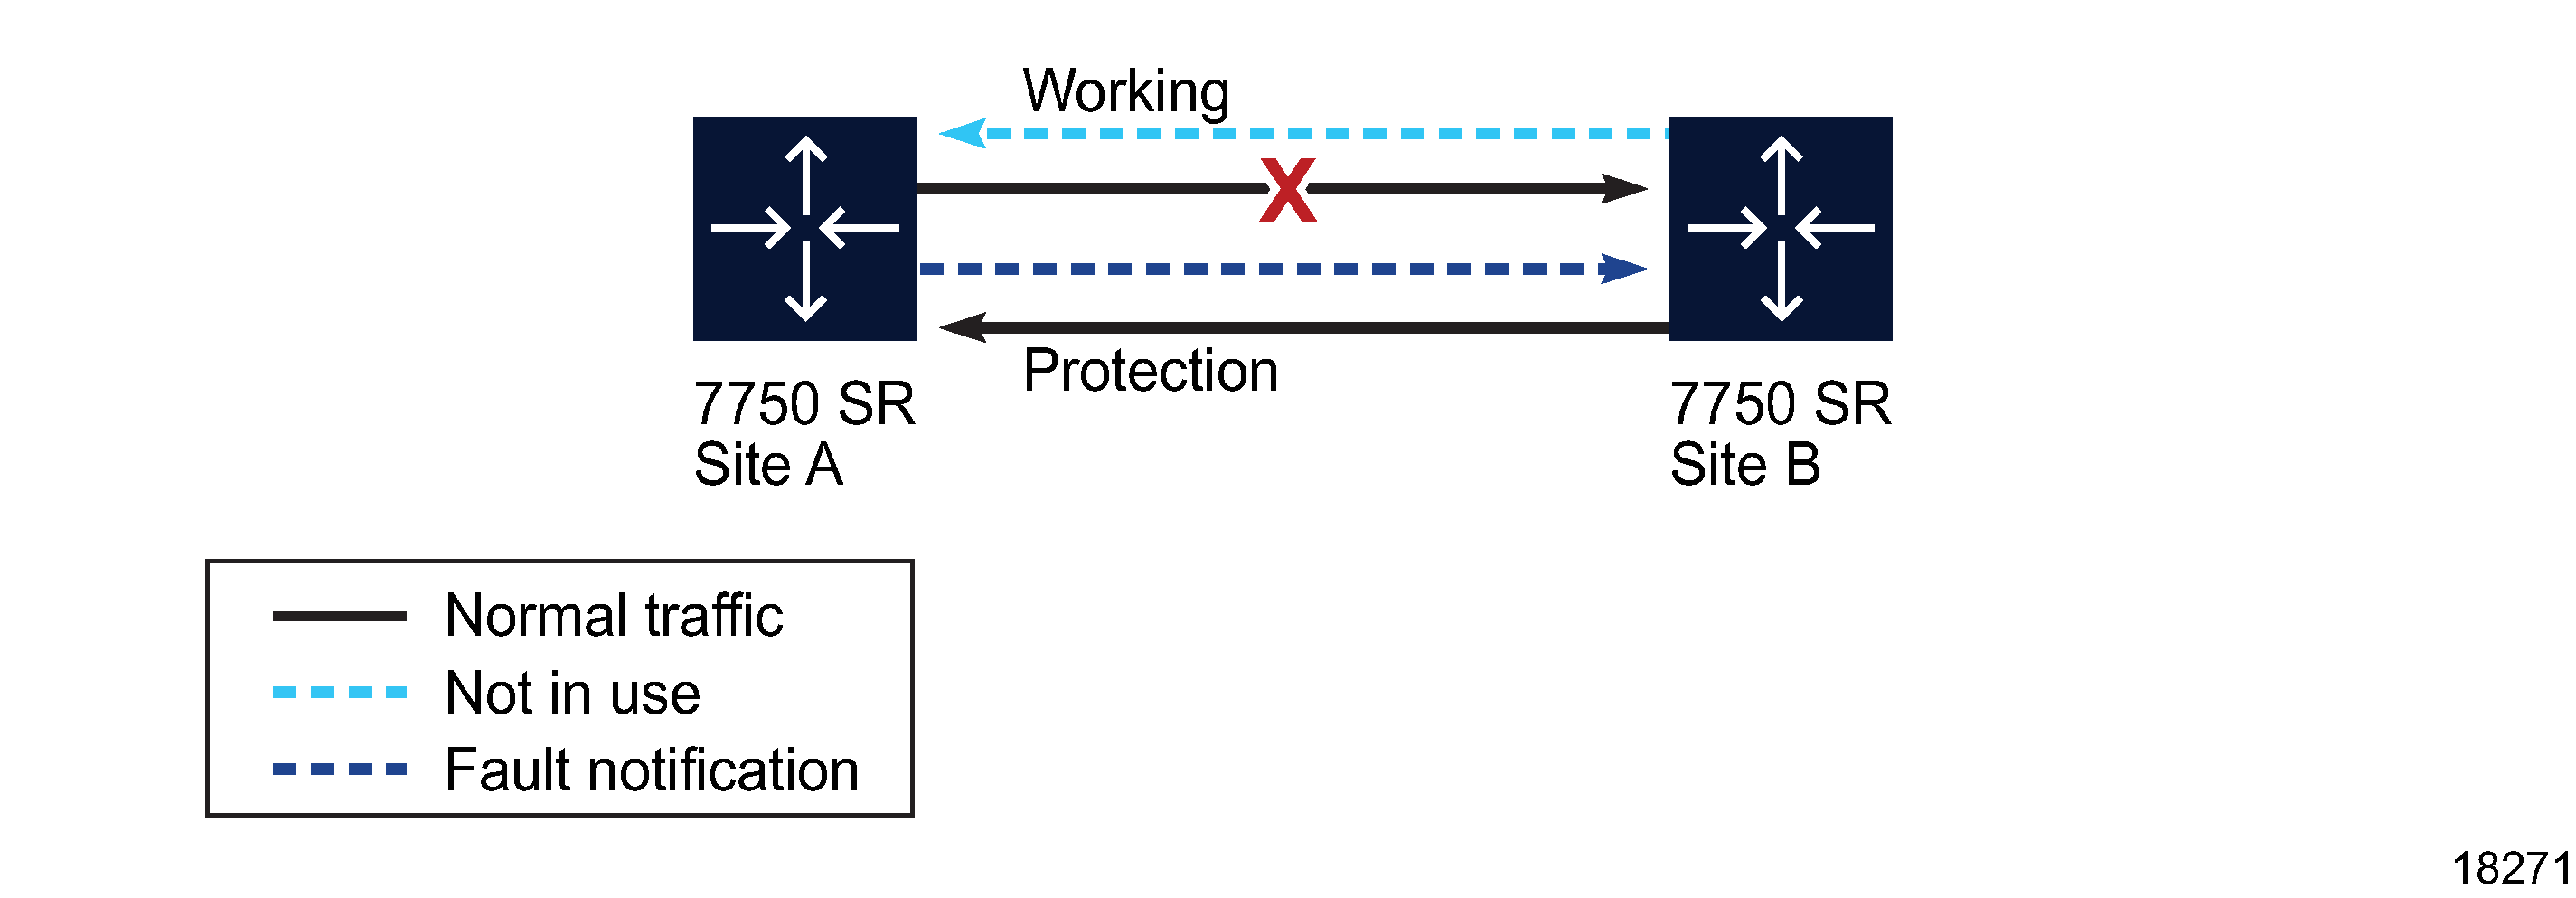 Site B switches to the protection line and site A acknowledges the fault